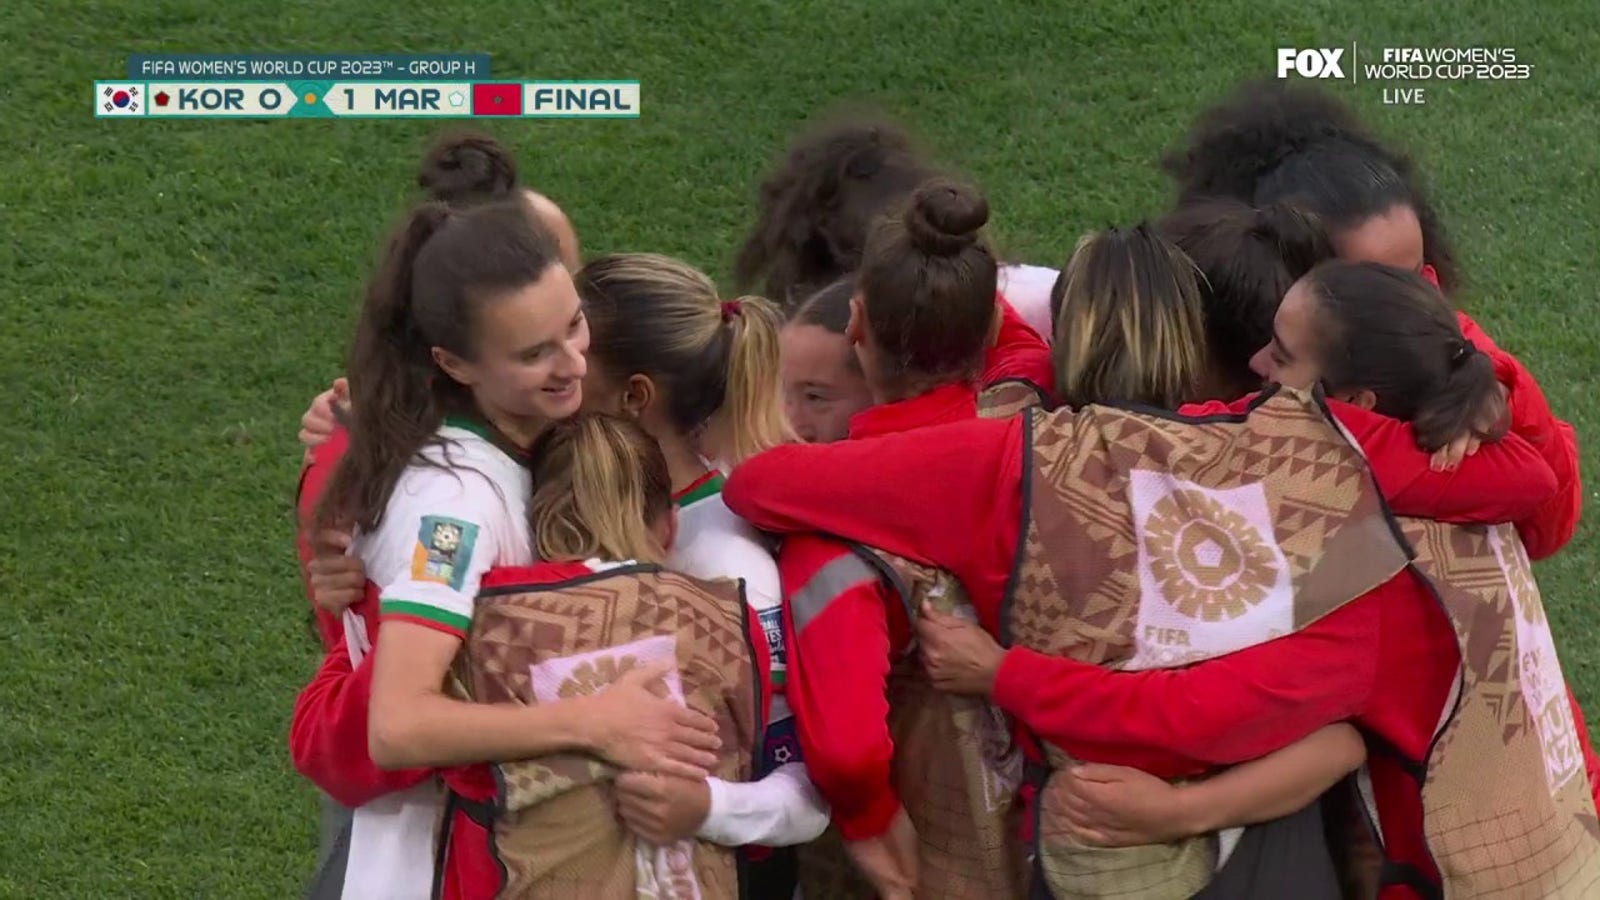 Morocco wins its first ever Women's World Cup match after 1-0 victory over South Korea